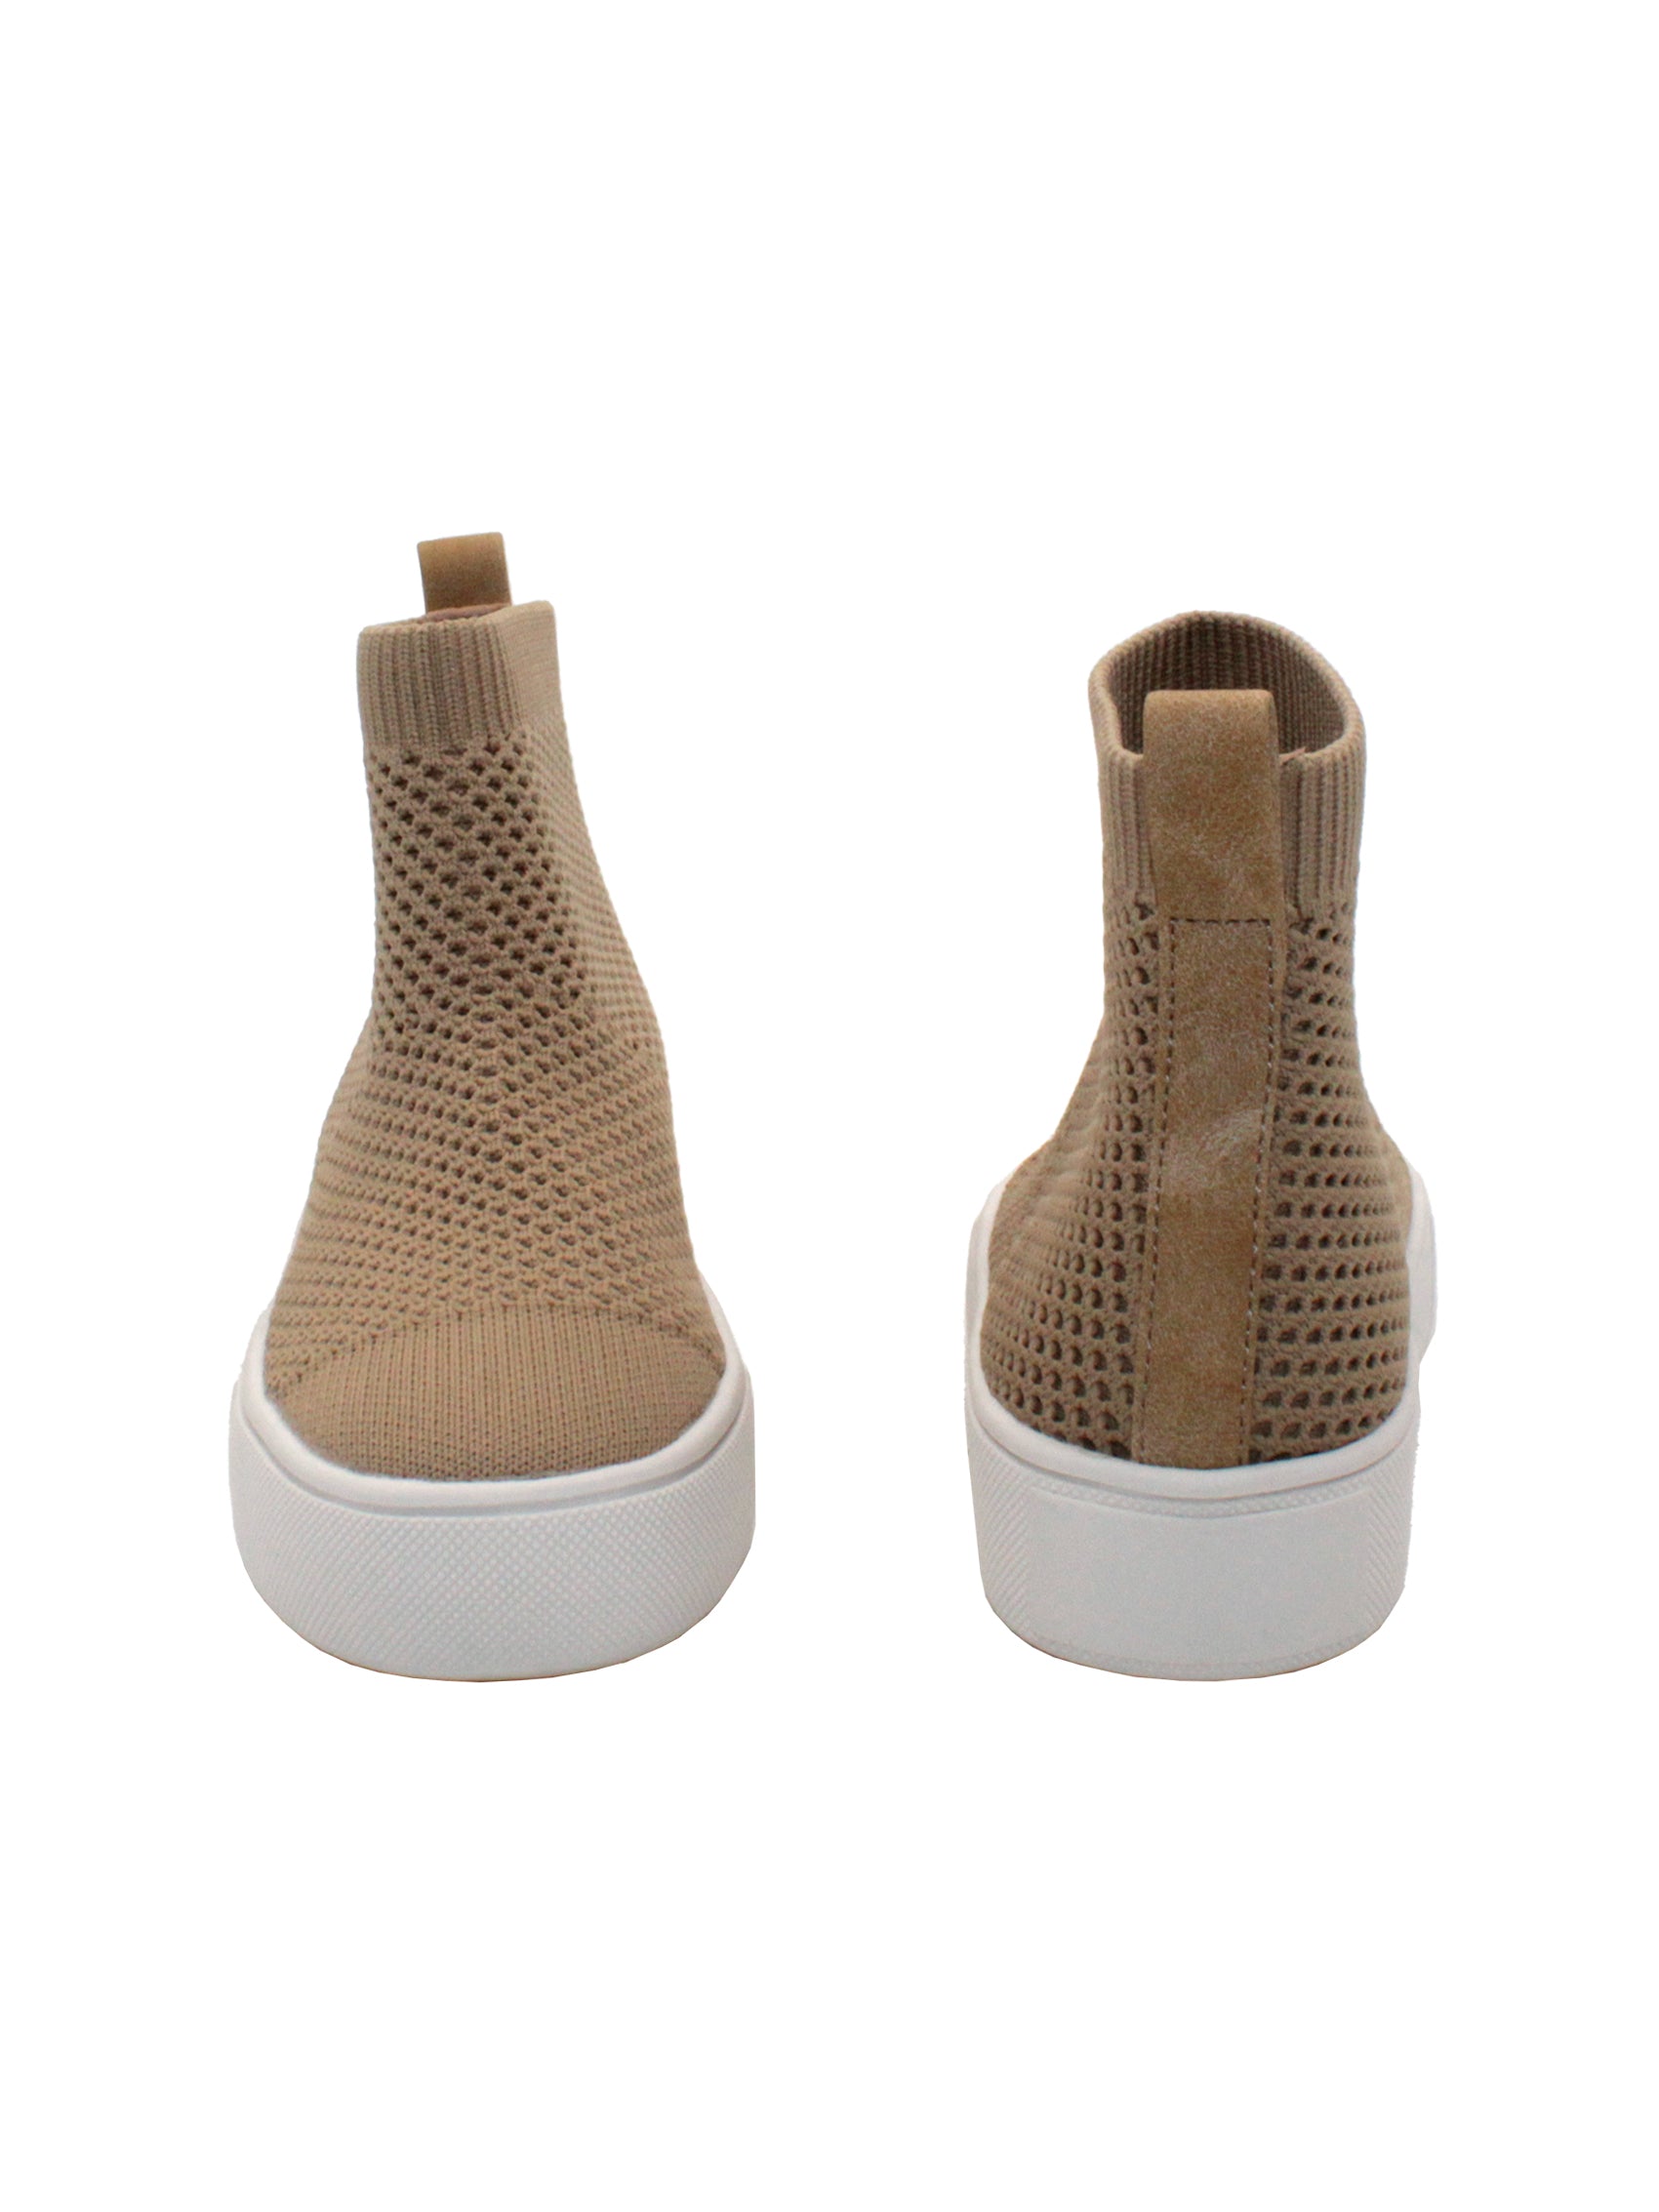 Stretch knit upper with back pull tab Stretch knit lining Internal nylon zipper Slip-on bootie sneaker style Signature ultra comfort EVA insole Approx. 3.5” shaft height Textured rubber sneaker bottom beige cfront and back